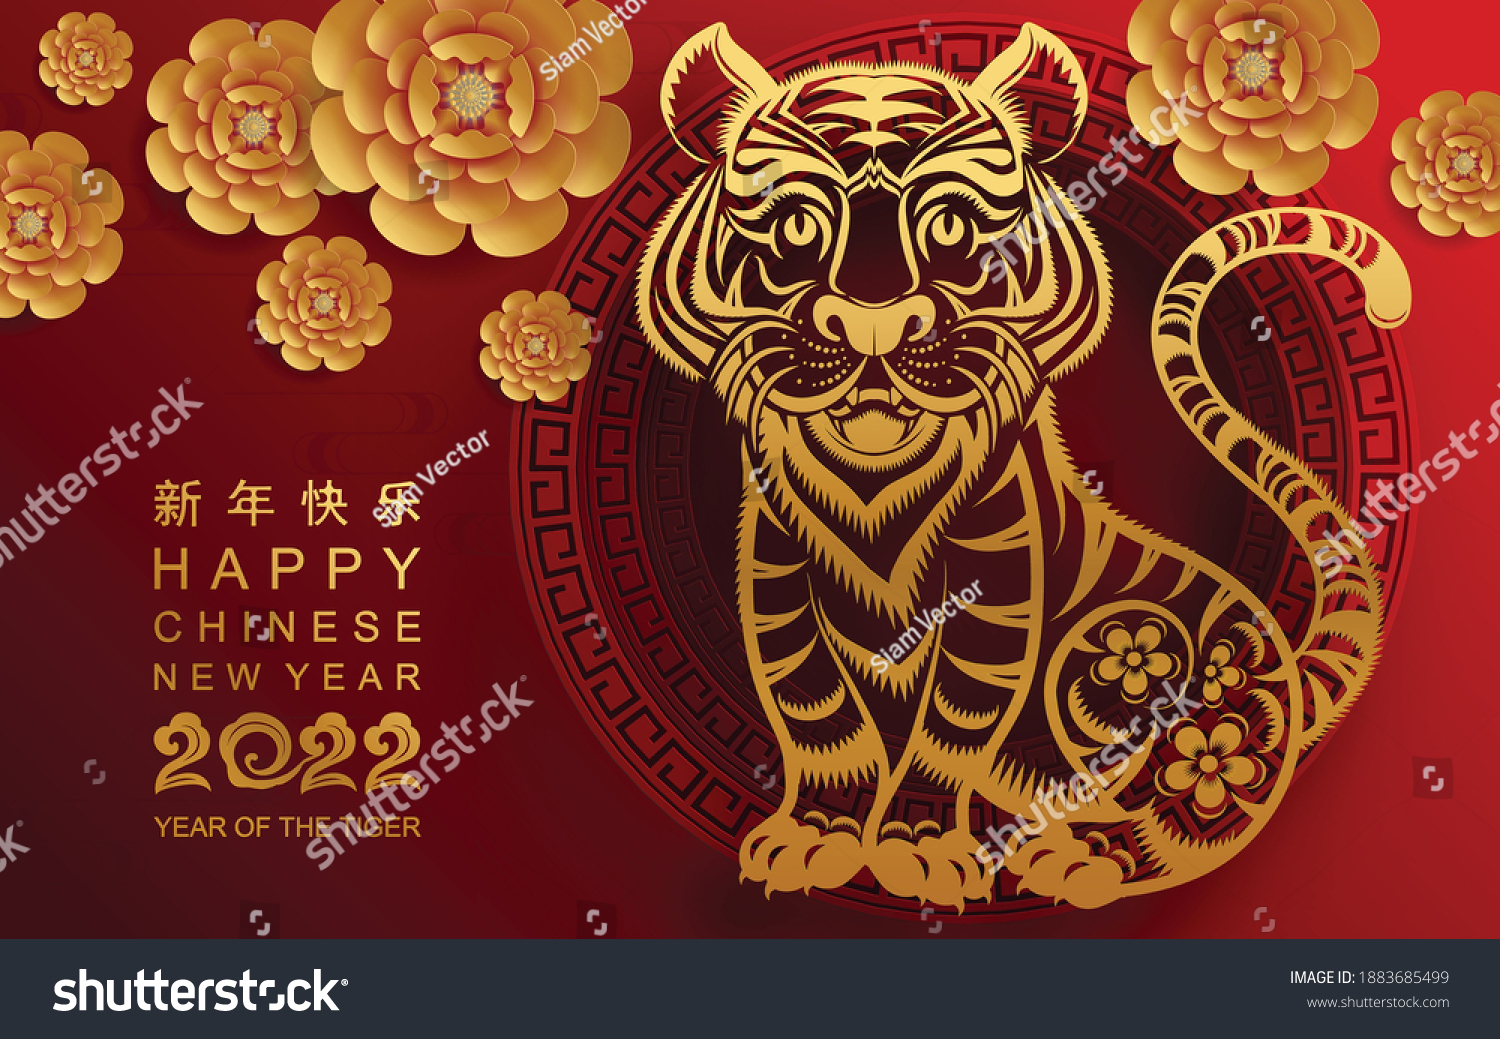 Chinese New Year 2022 Year Tiger Stock Vector Royalty Free 1883685499 Shutterstock